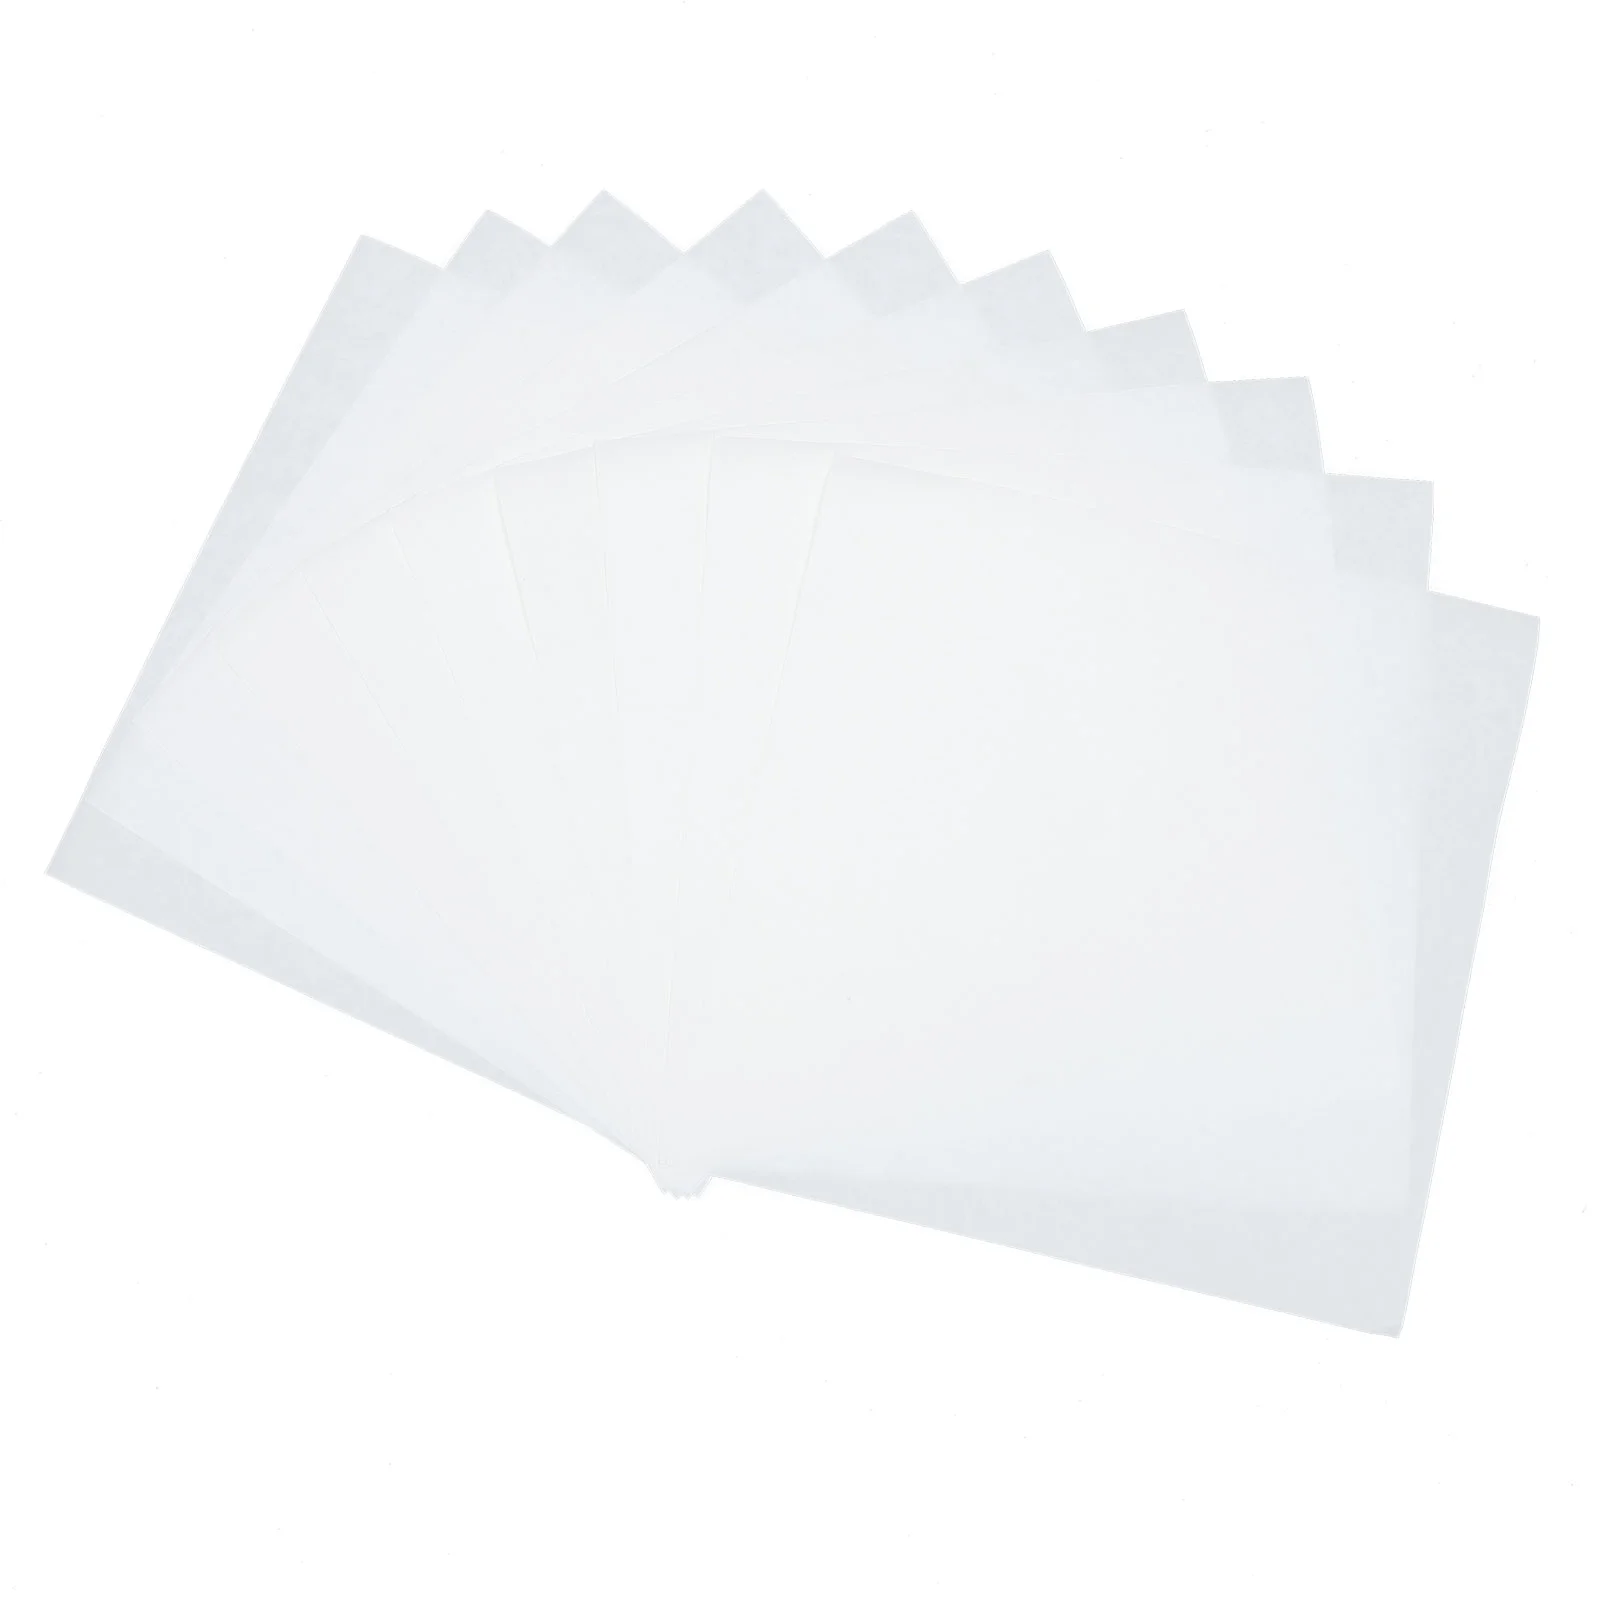 

30 Sheets Qualitative Laboratory Filter Paper Absorbent Absorbing Piece High Labs White Experiment Filtering